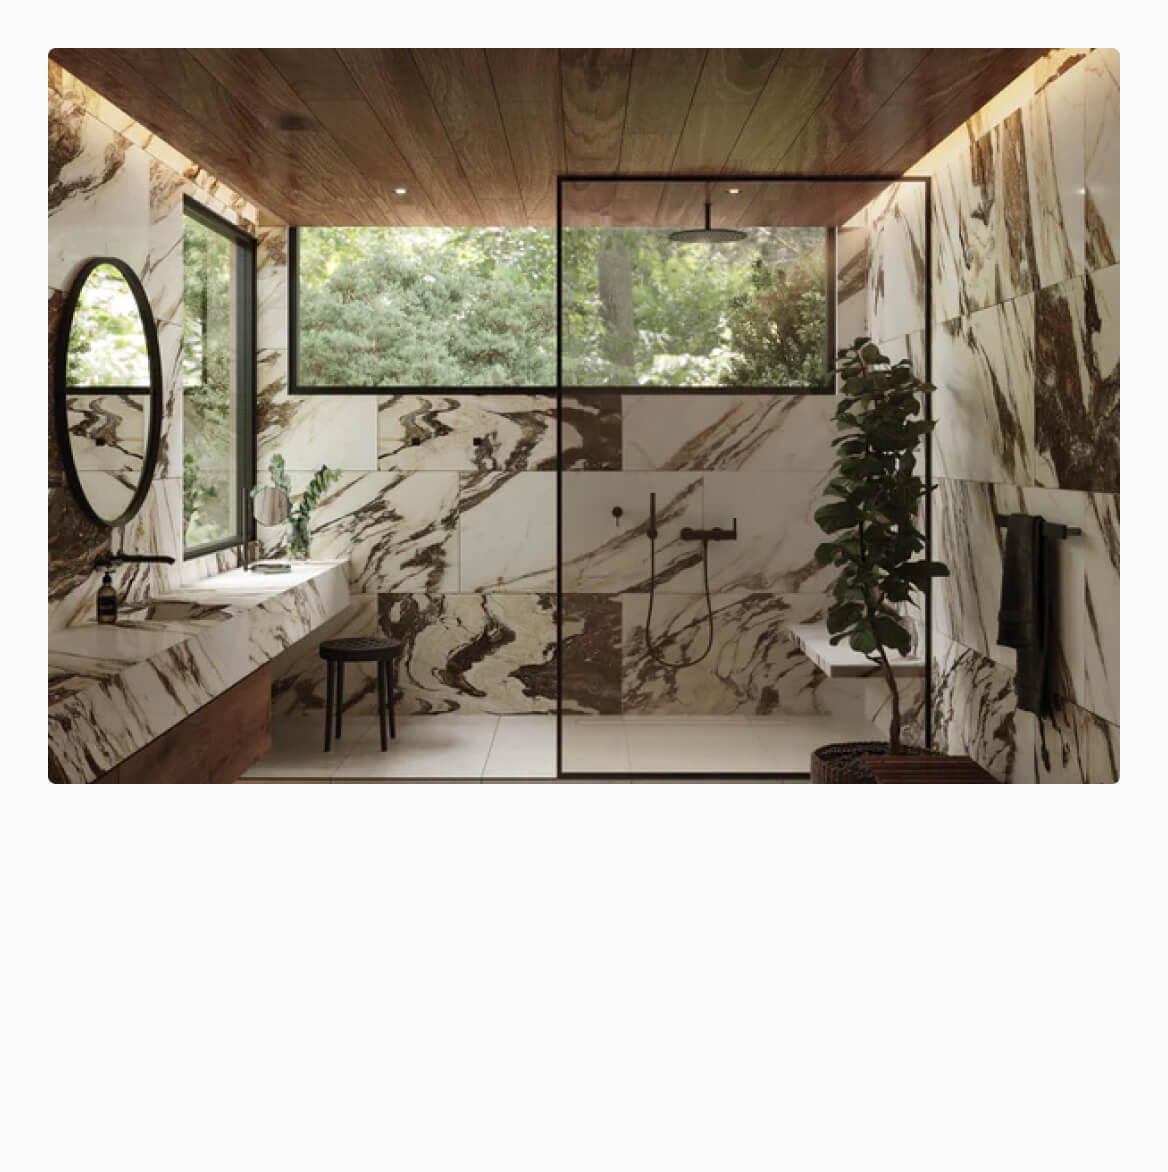 Opulent bathroom showcasing dramatic veined 24x48 tiles in a tranquil setting